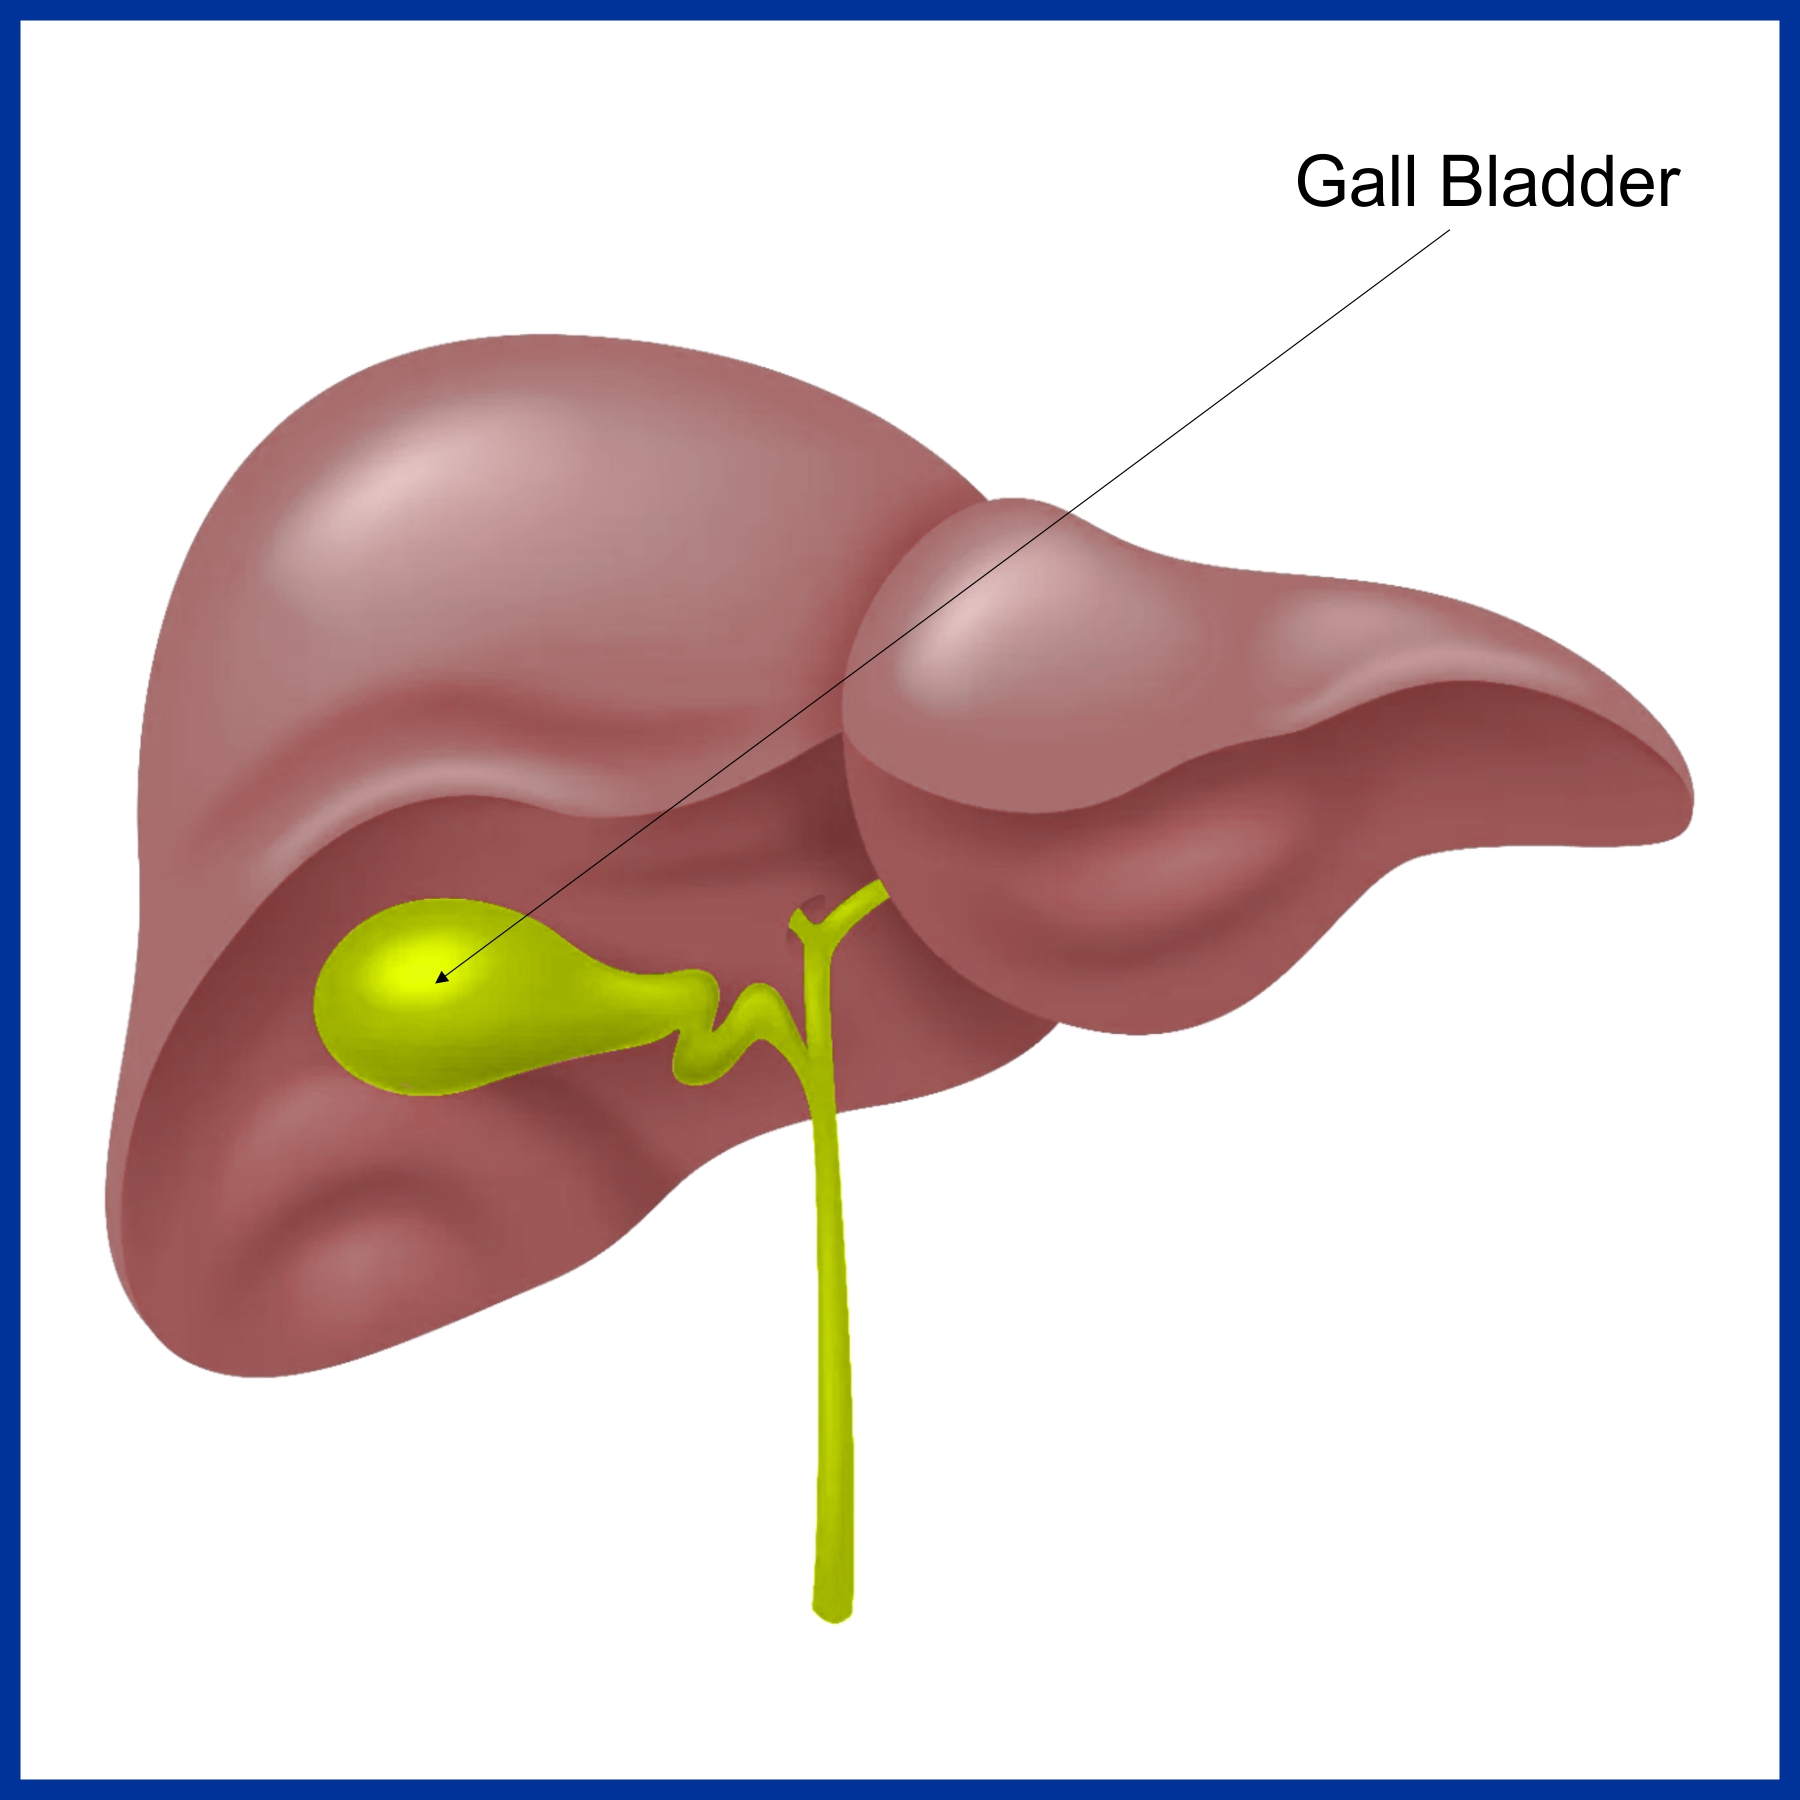 How much does a gall bladder weigh